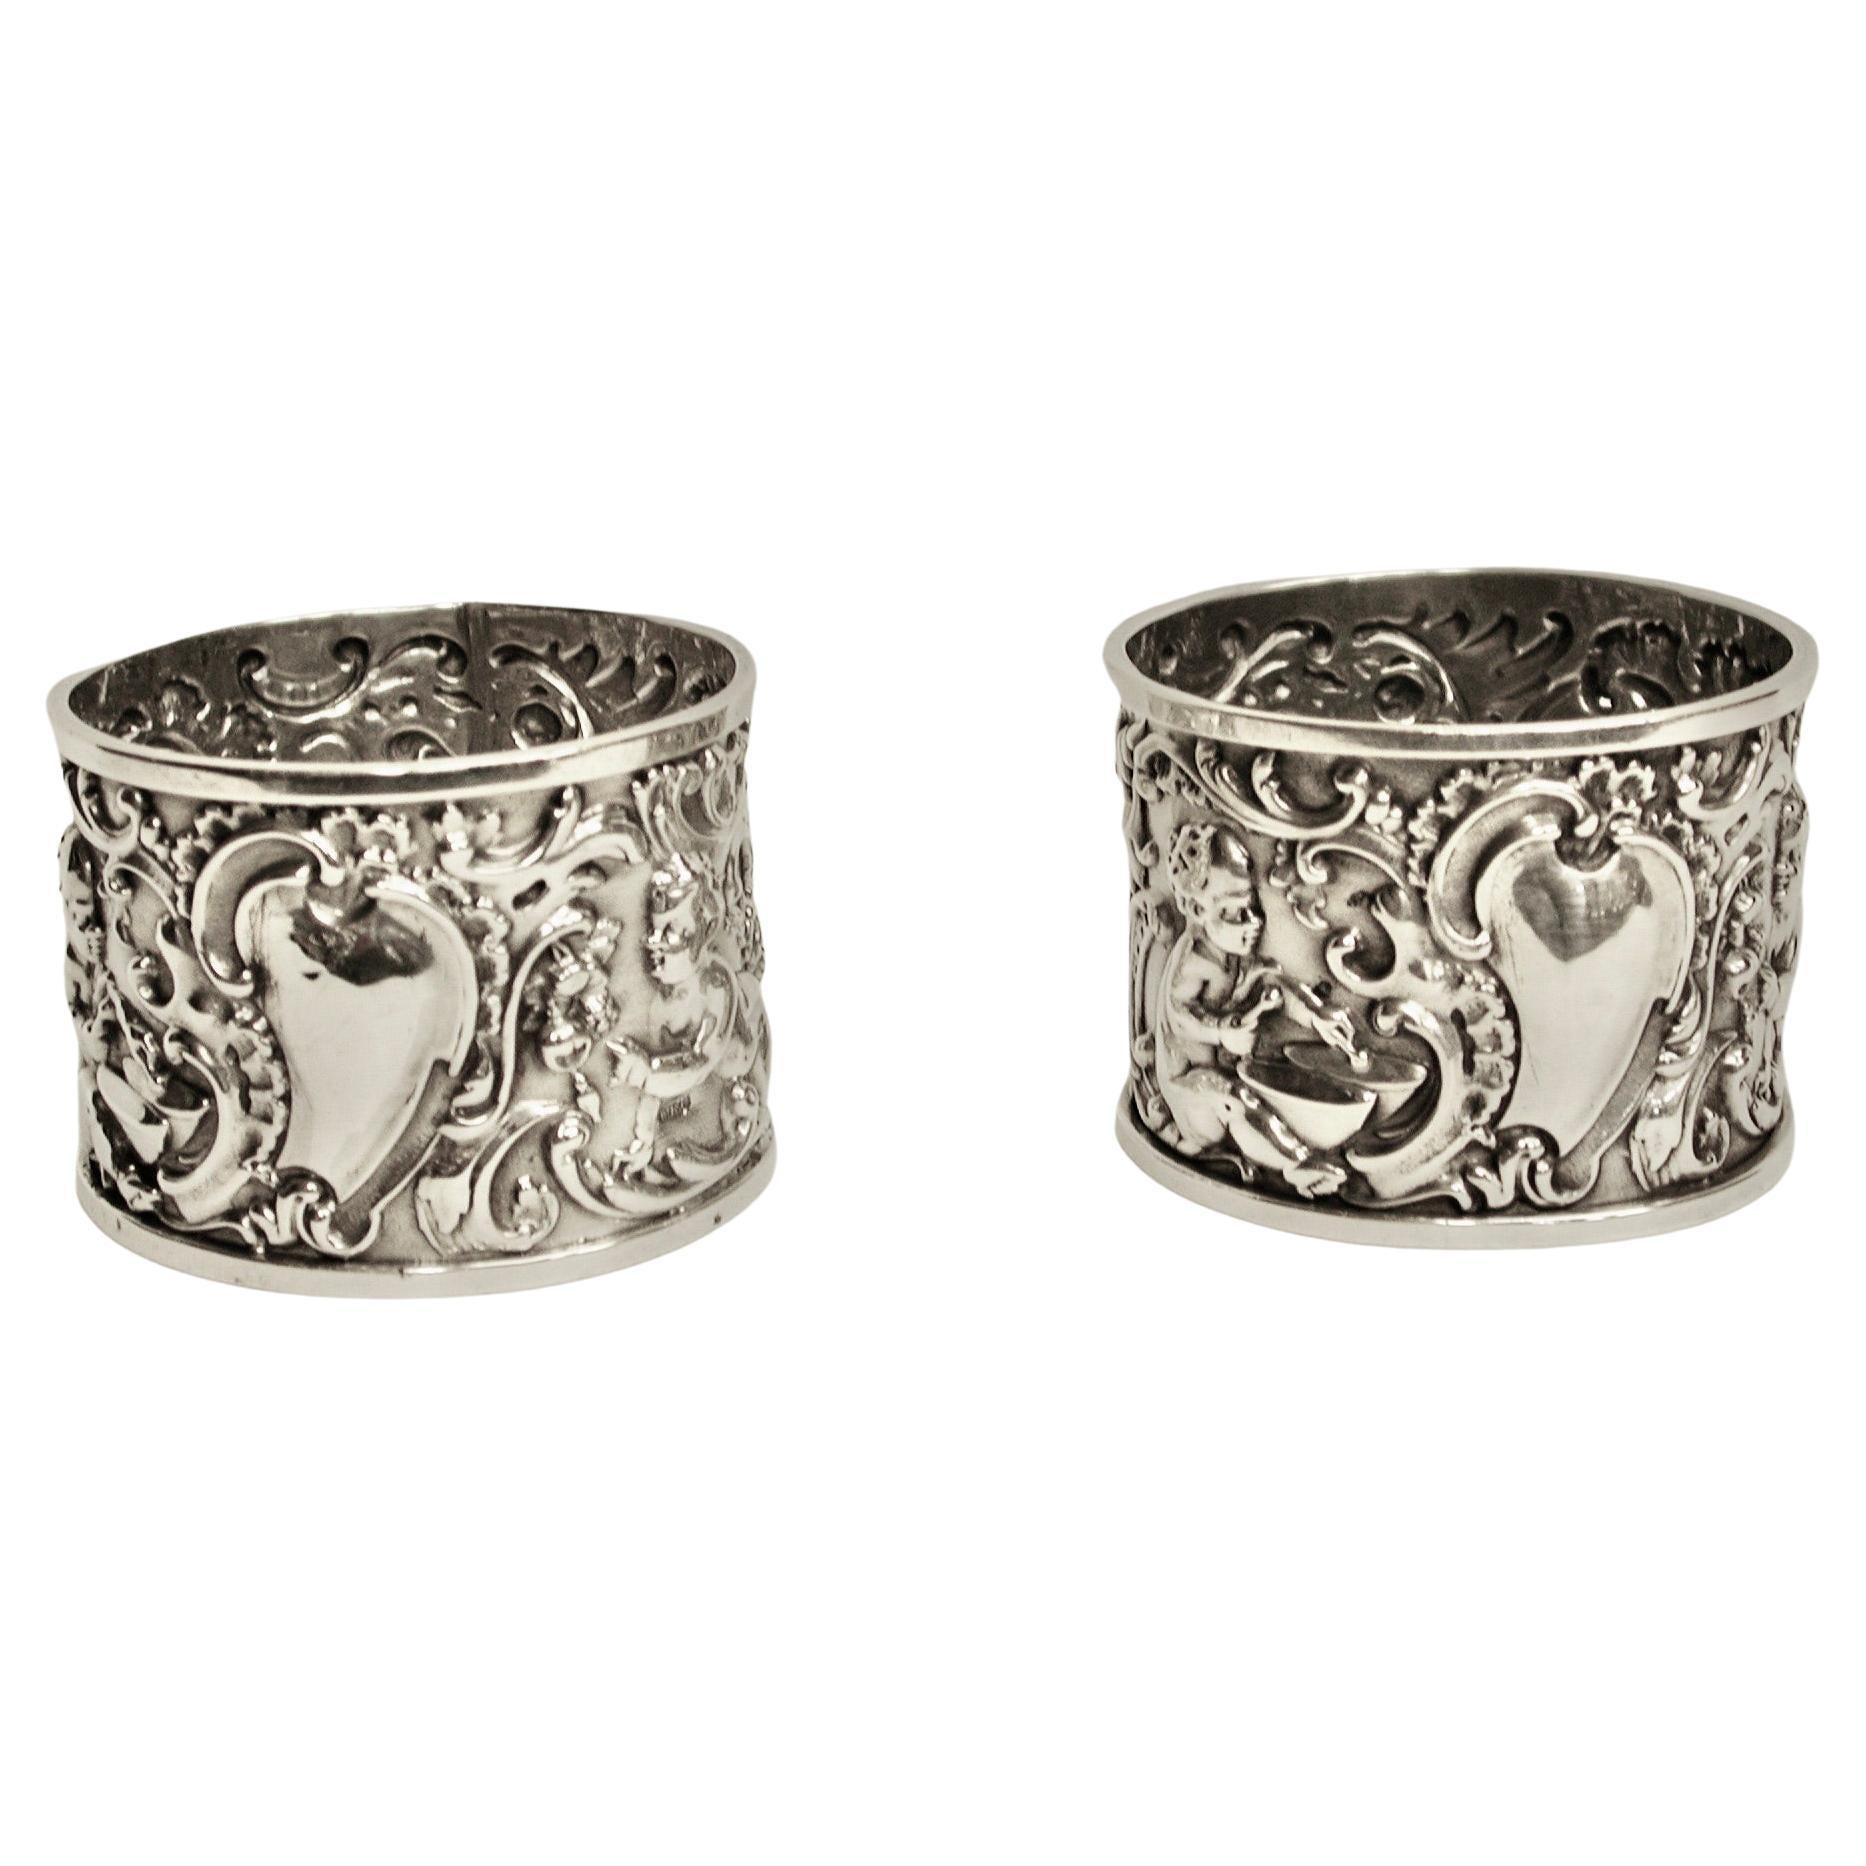 Pair of Victorian Embossed Silver Napkin Rings, dated 1895, William Richard Corke